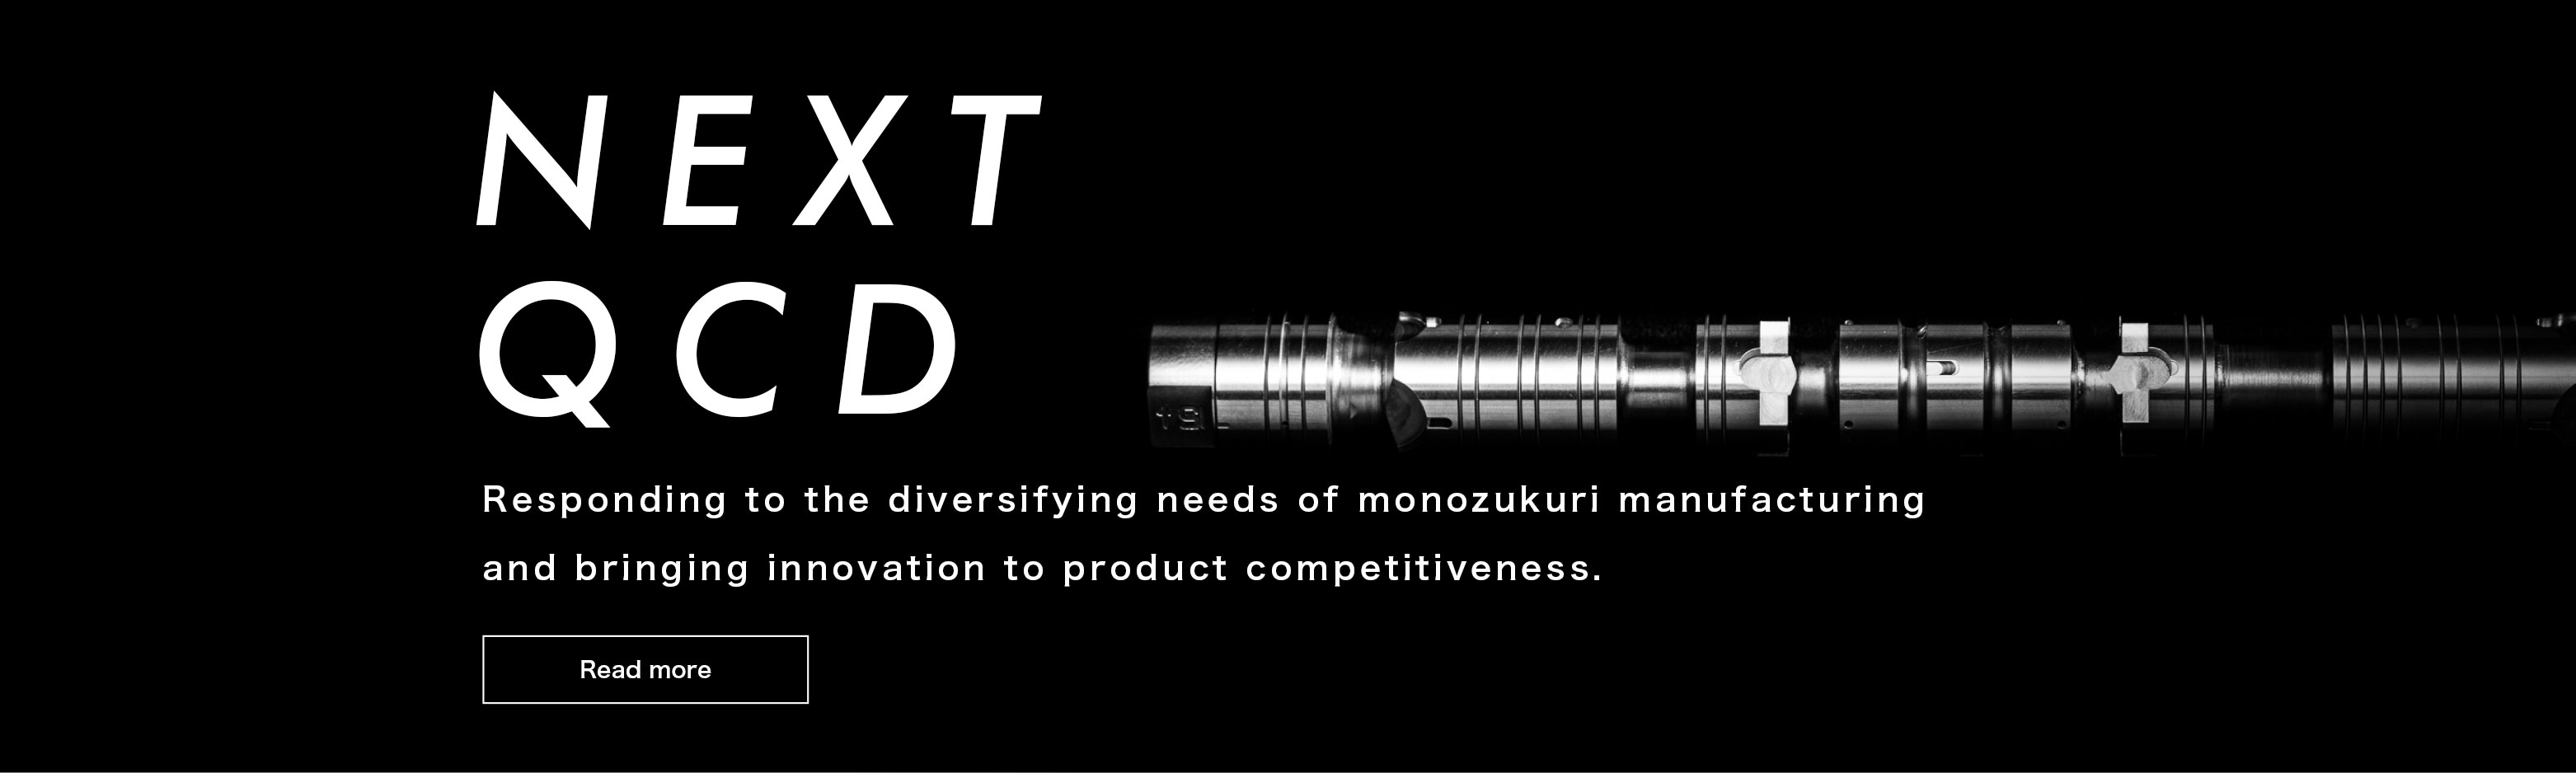 NEXT QCD Responding to the diversifying needs of monozukuri manufacturing and bringing innovation to product competitiveness.